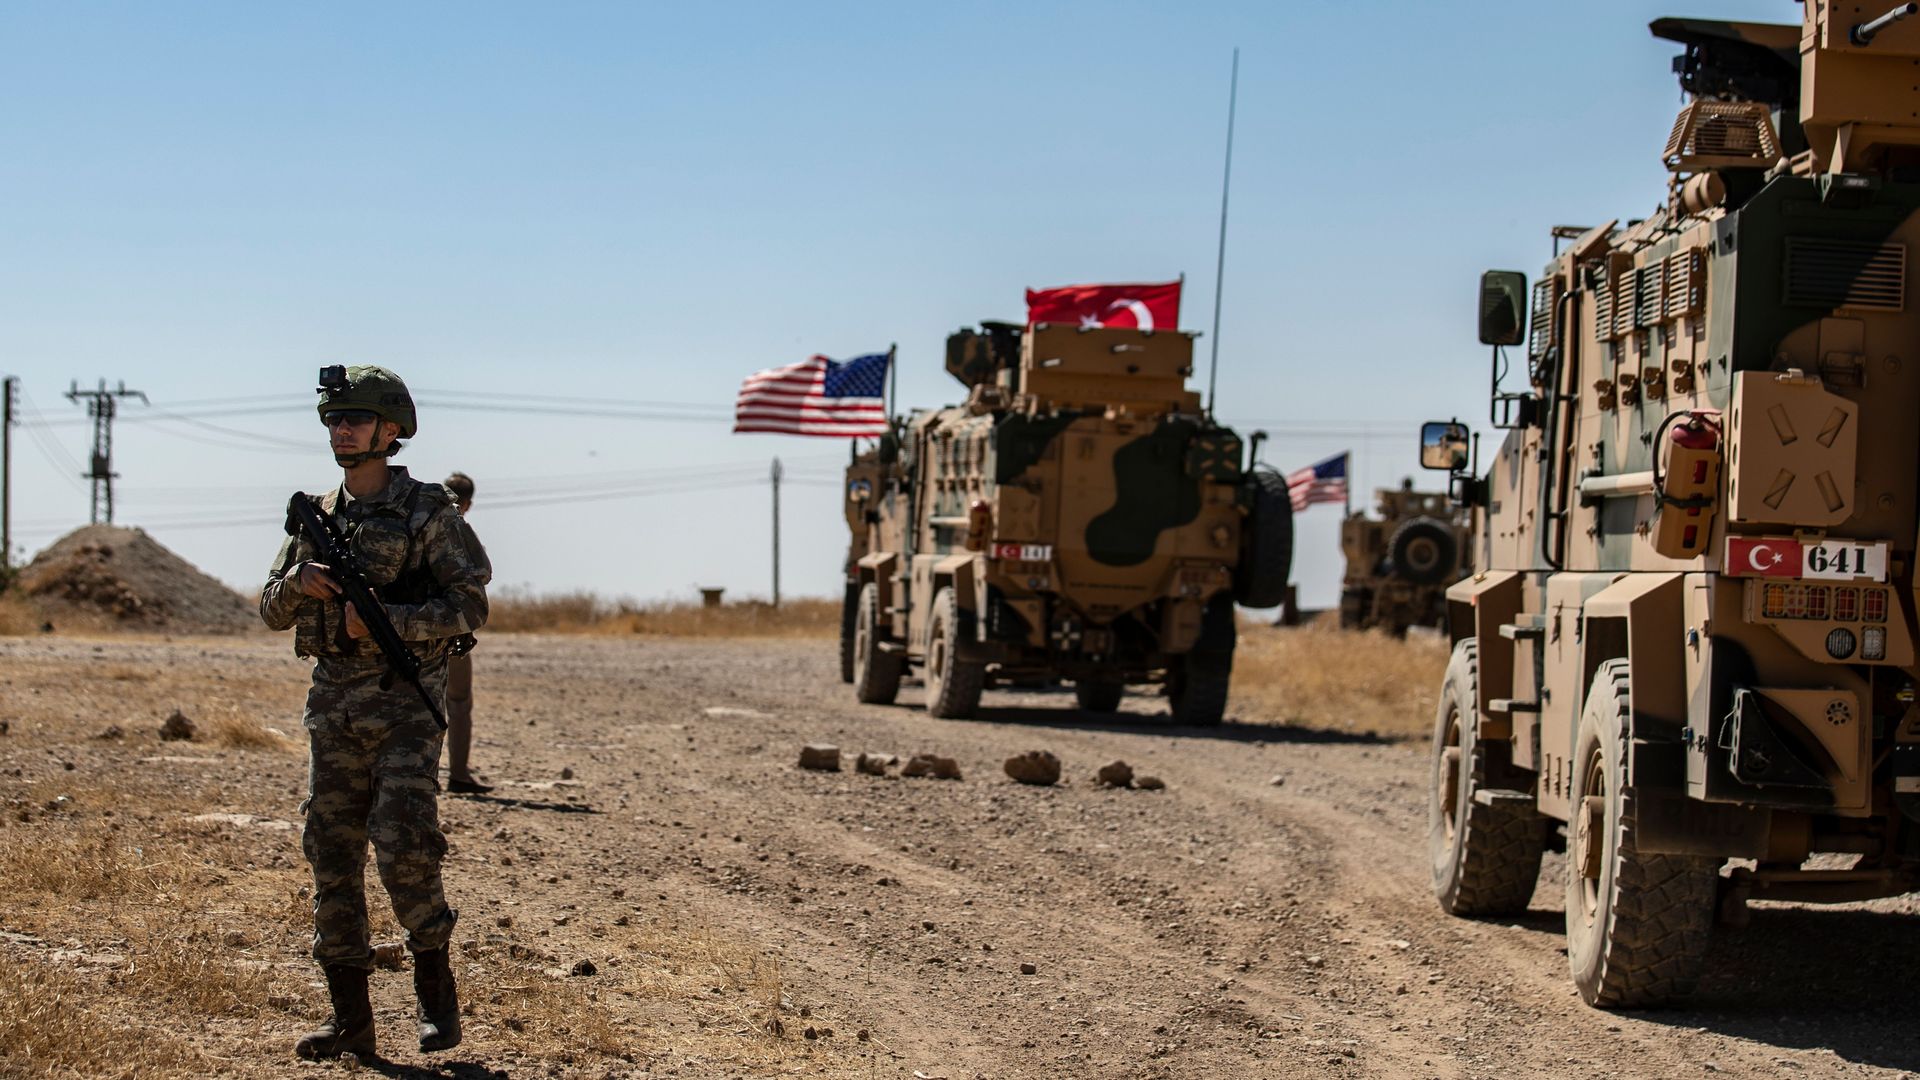 A US soldier stands guard during a joint patrol with Turkish troops in the Syrian village of al-Hashisha on the outskirts of Tal Abyad town along the border with Turkish troops, on September 8, 2019. 